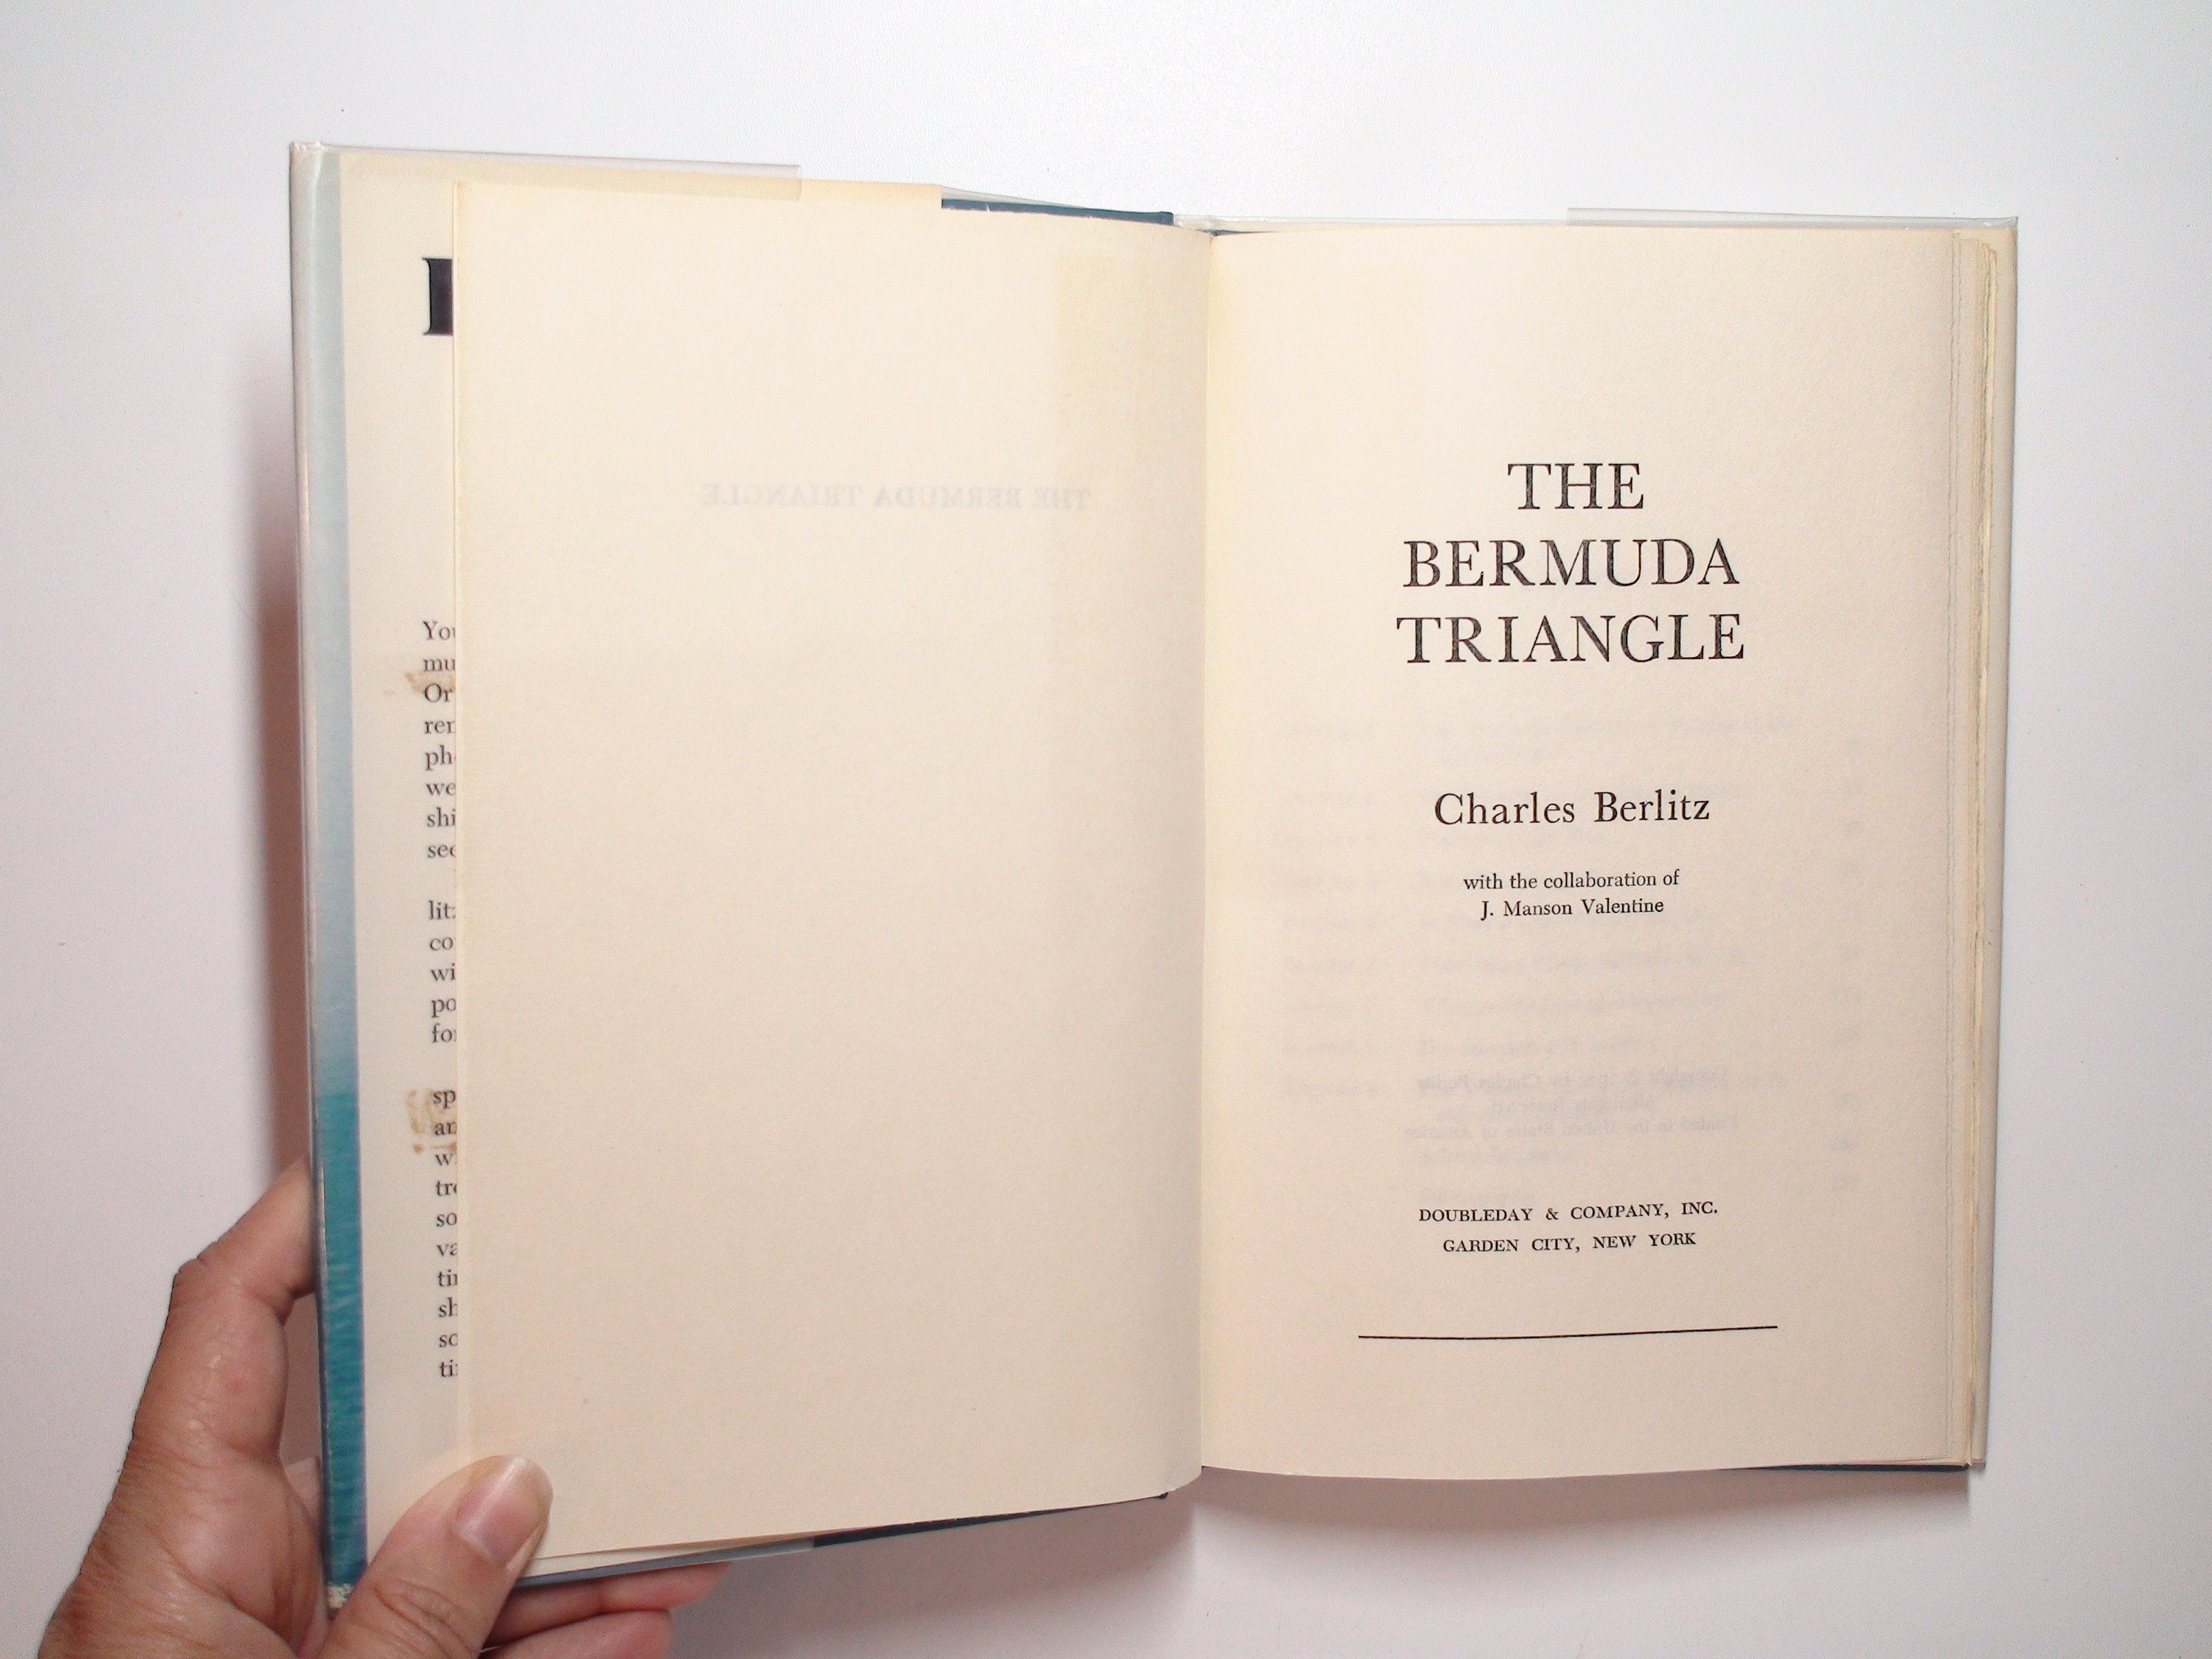 The Bermuda Triangle by Charles Berlitz, Book Club Ed, Illustrated, 1974